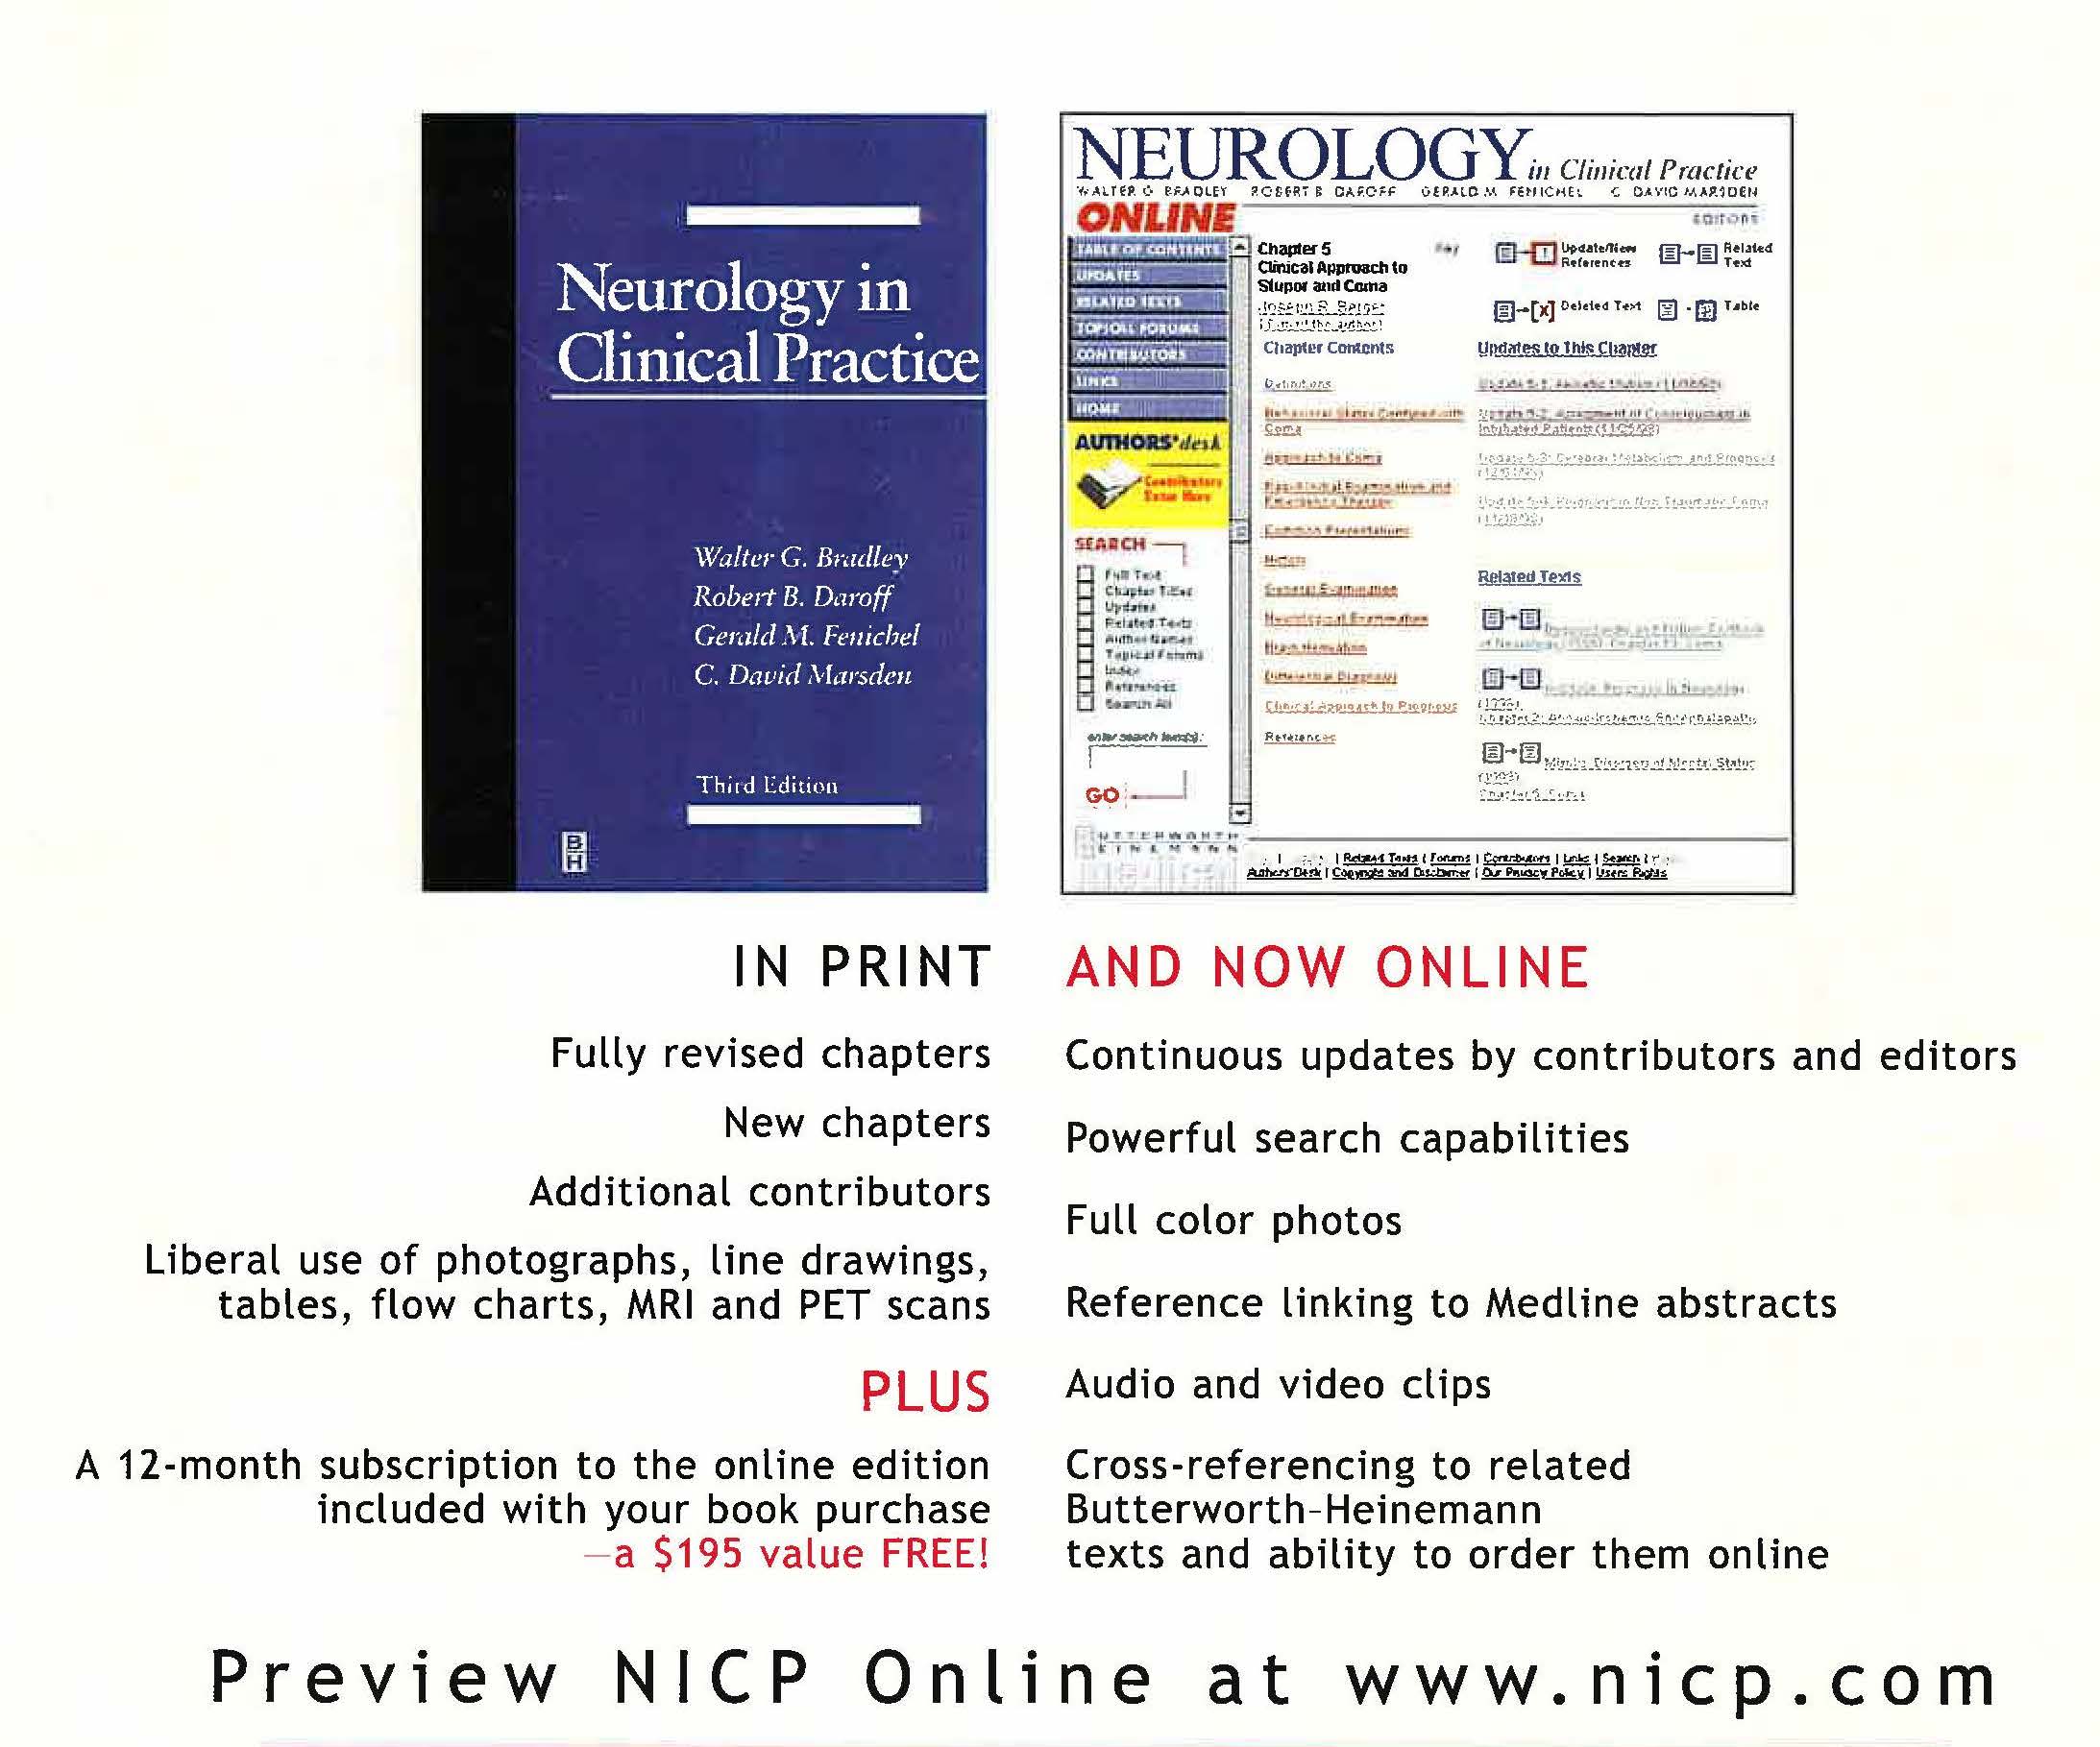 Neurology in Clinical Practice print and online editions ad